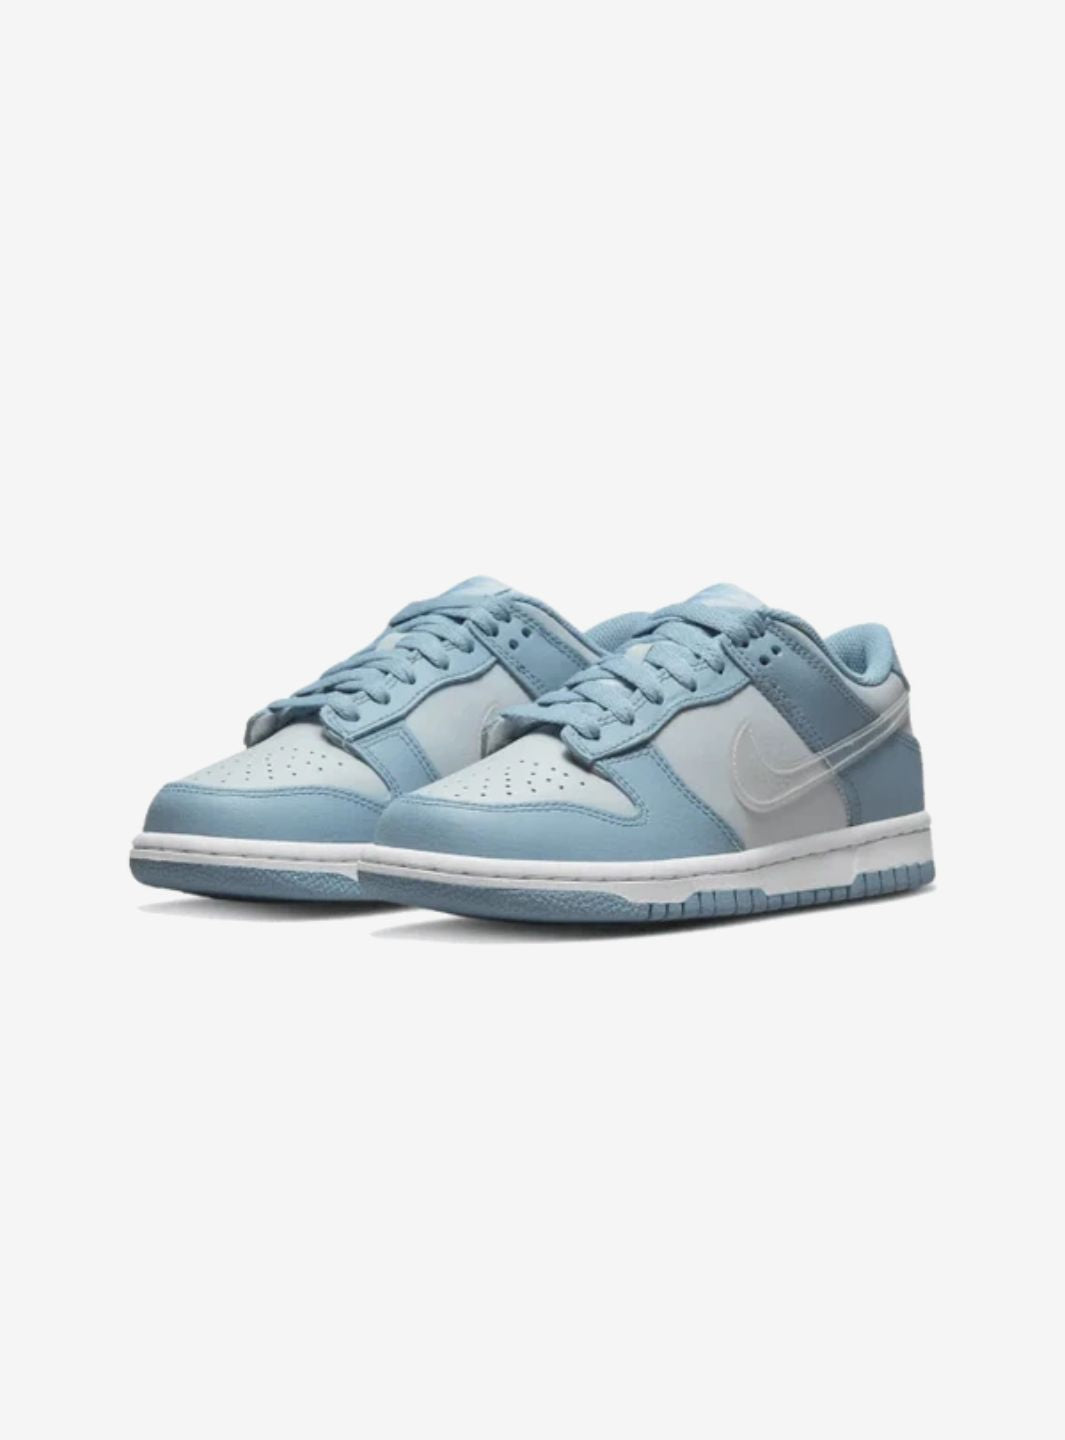 Nike Dunk Low Clear Blue Swoosh - DH9765-401 | ResellZone